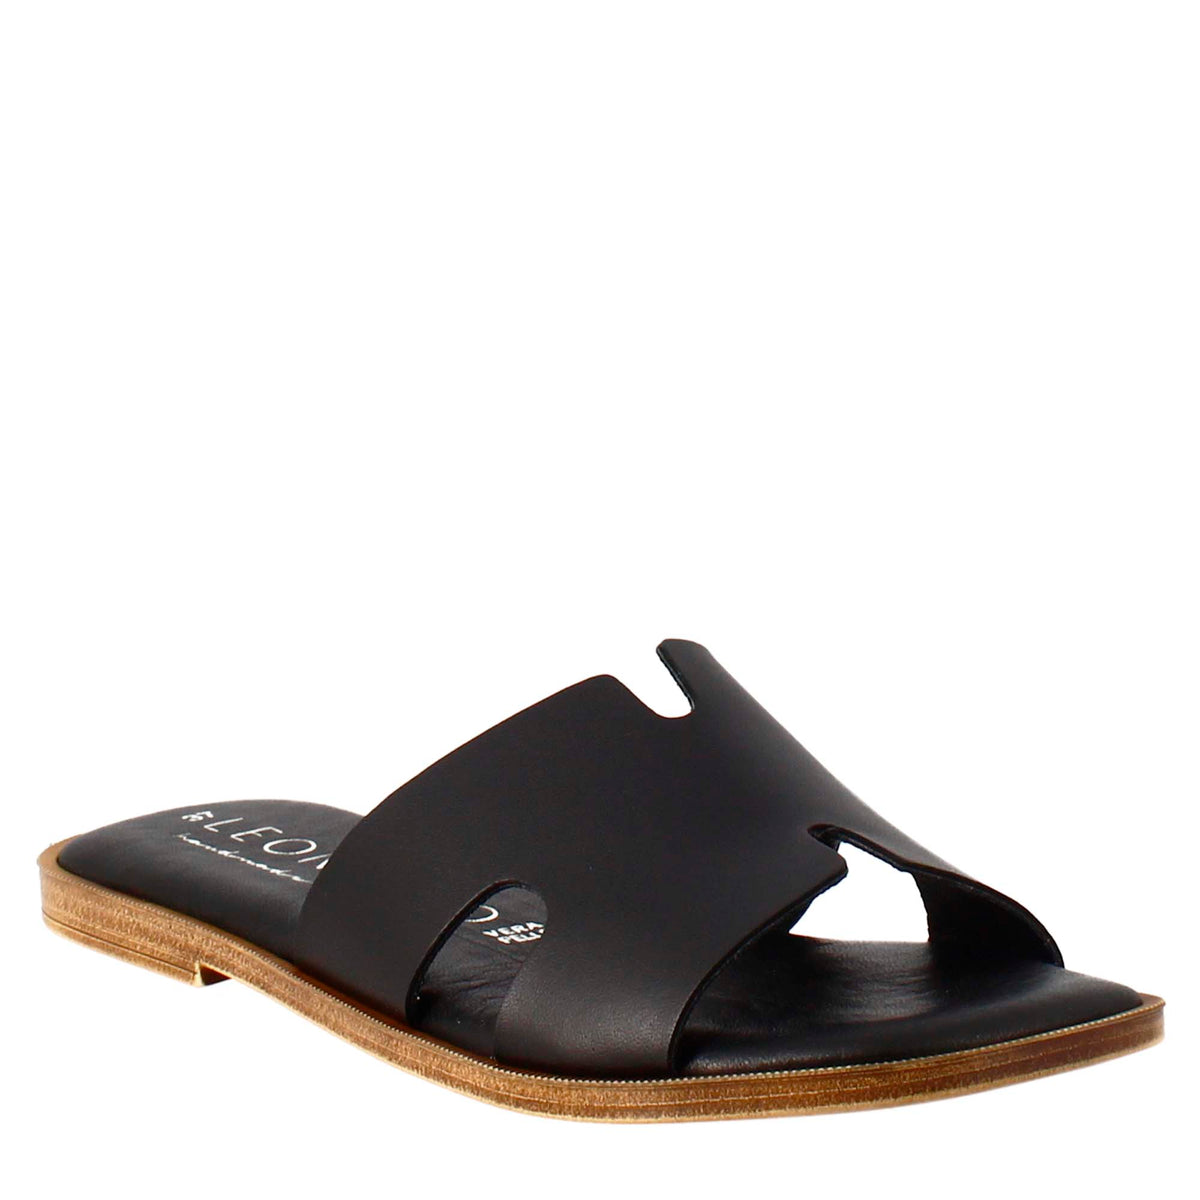 Women's H-shaped sandals in black leather